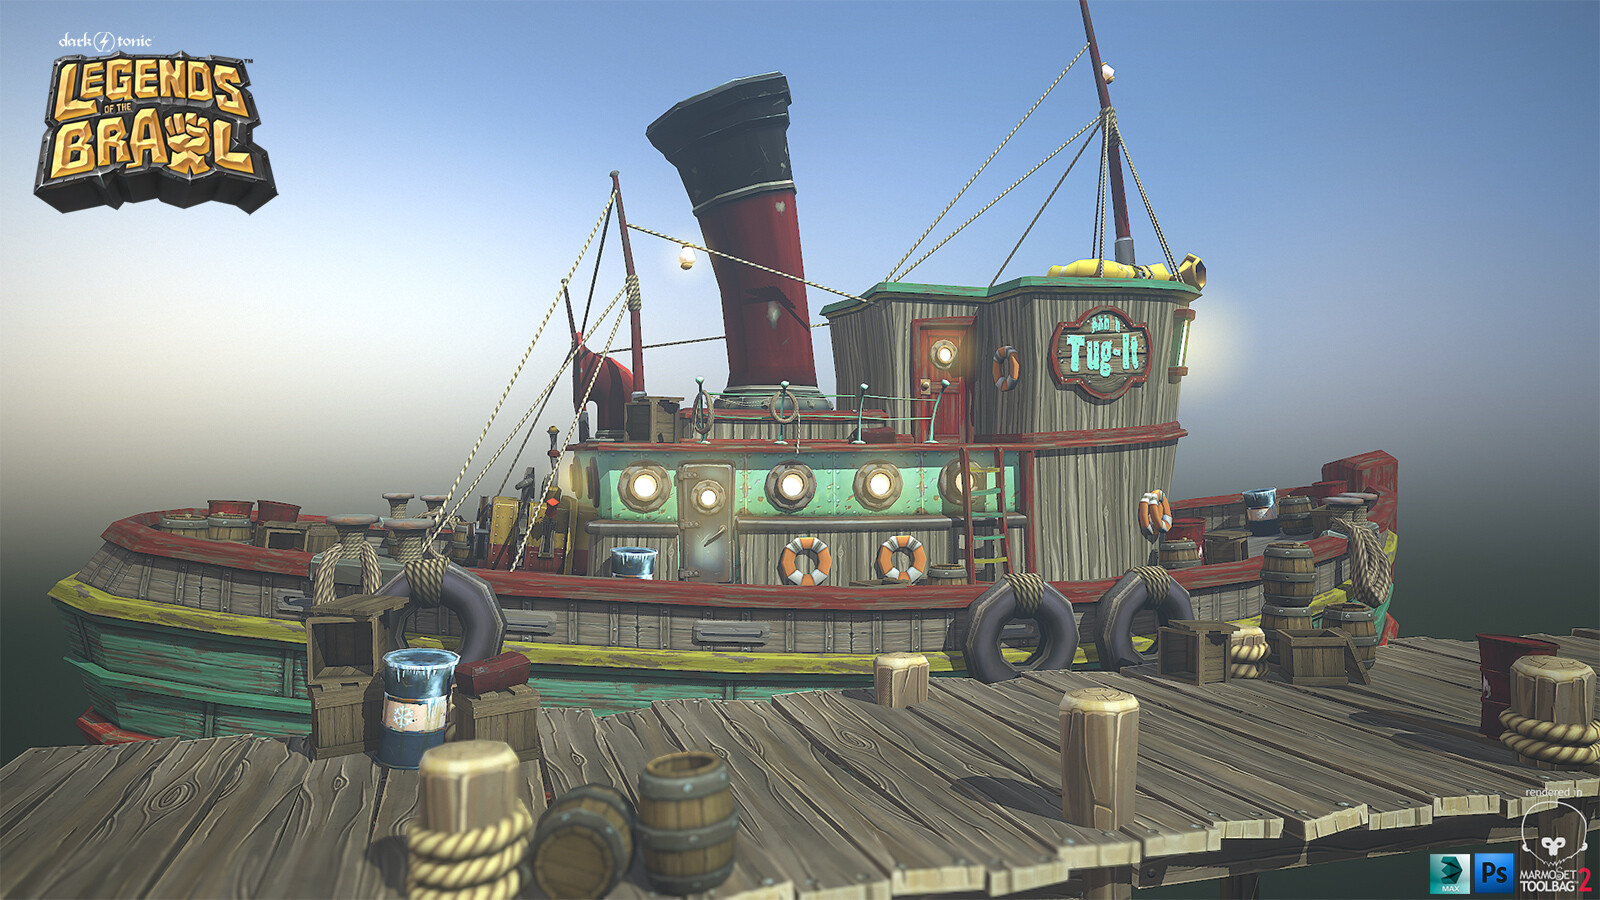 Stylized Tugboat, Props and Docks created for Legends of the Brawl